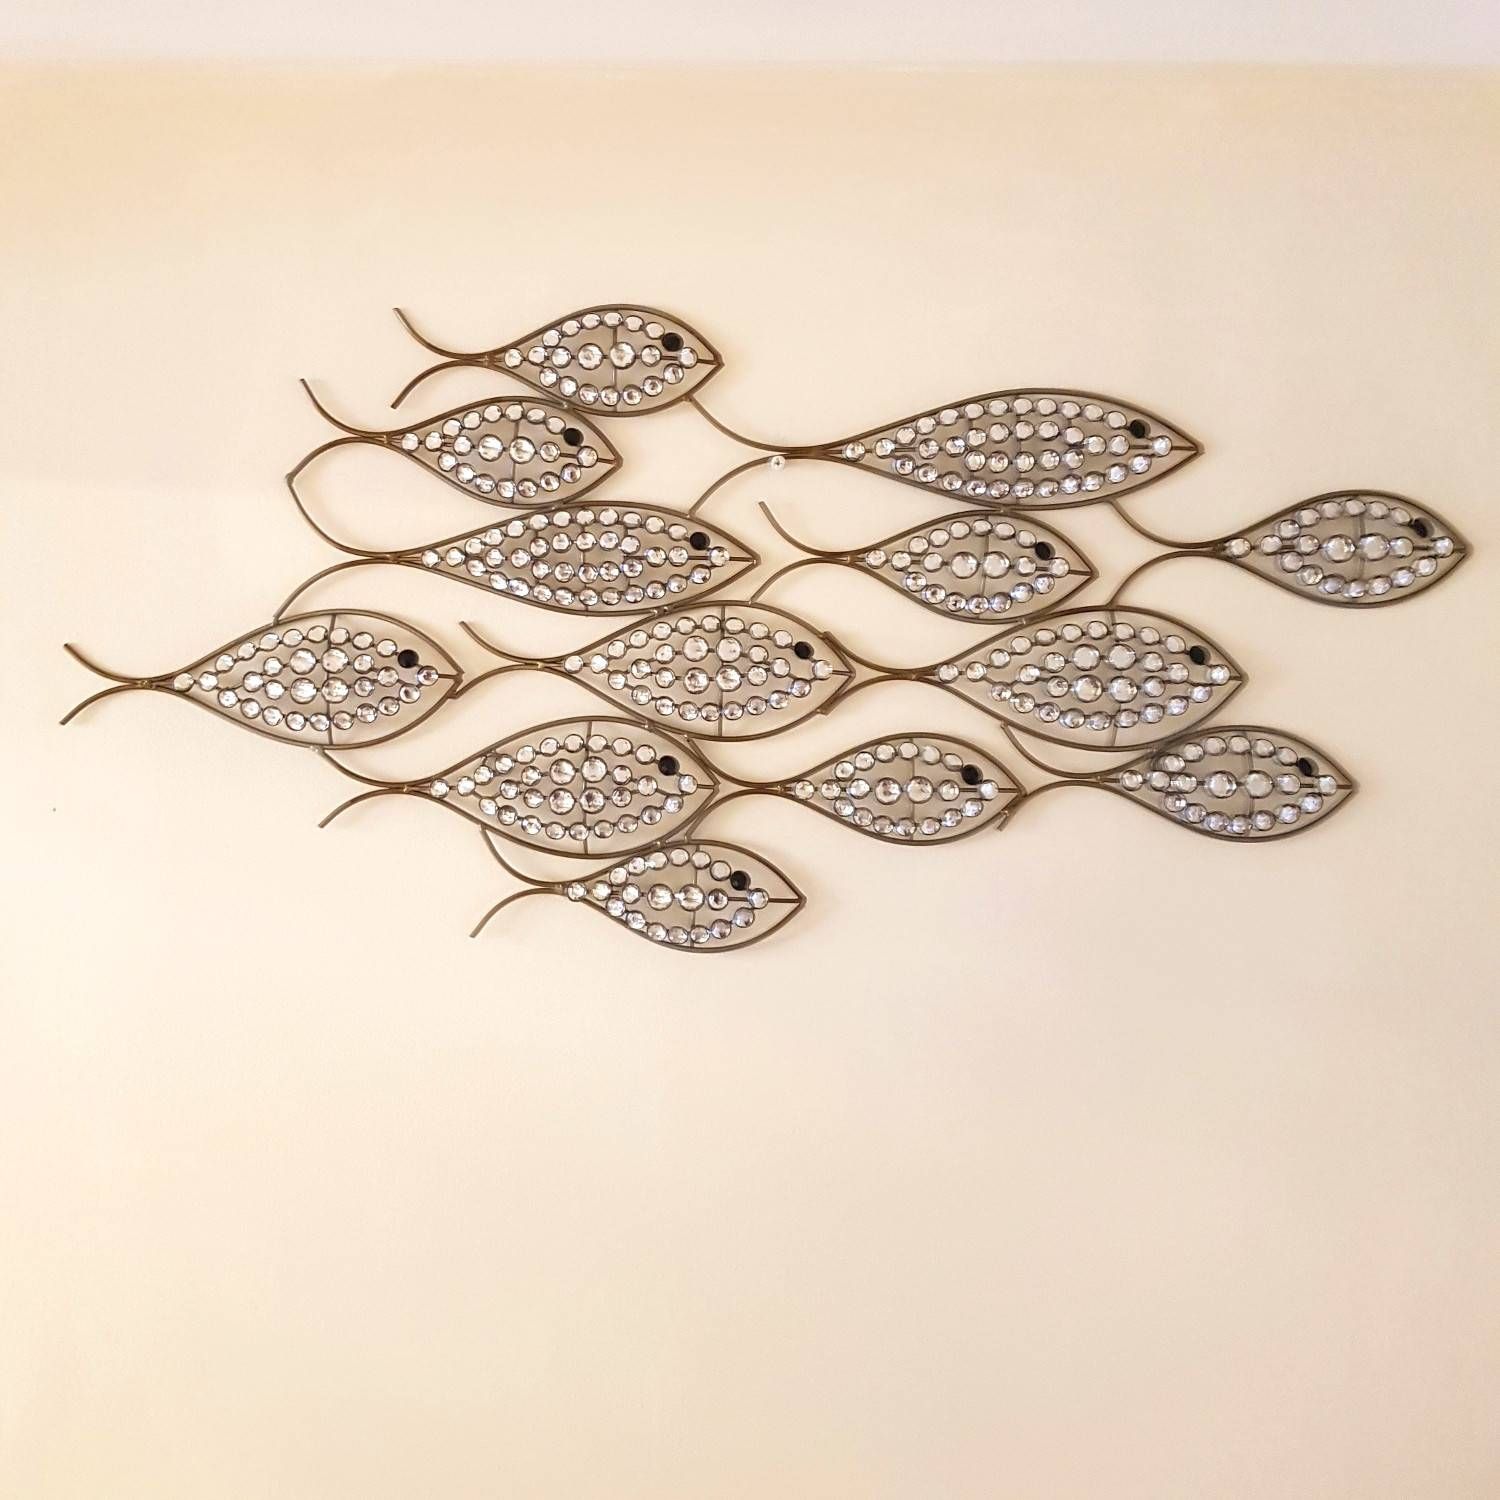 Diamond Fish Shoal Wall Art | Ebay With Regard To Most Up To Date Shoal Of Fish Metal Wall Art (View 25 of 30)